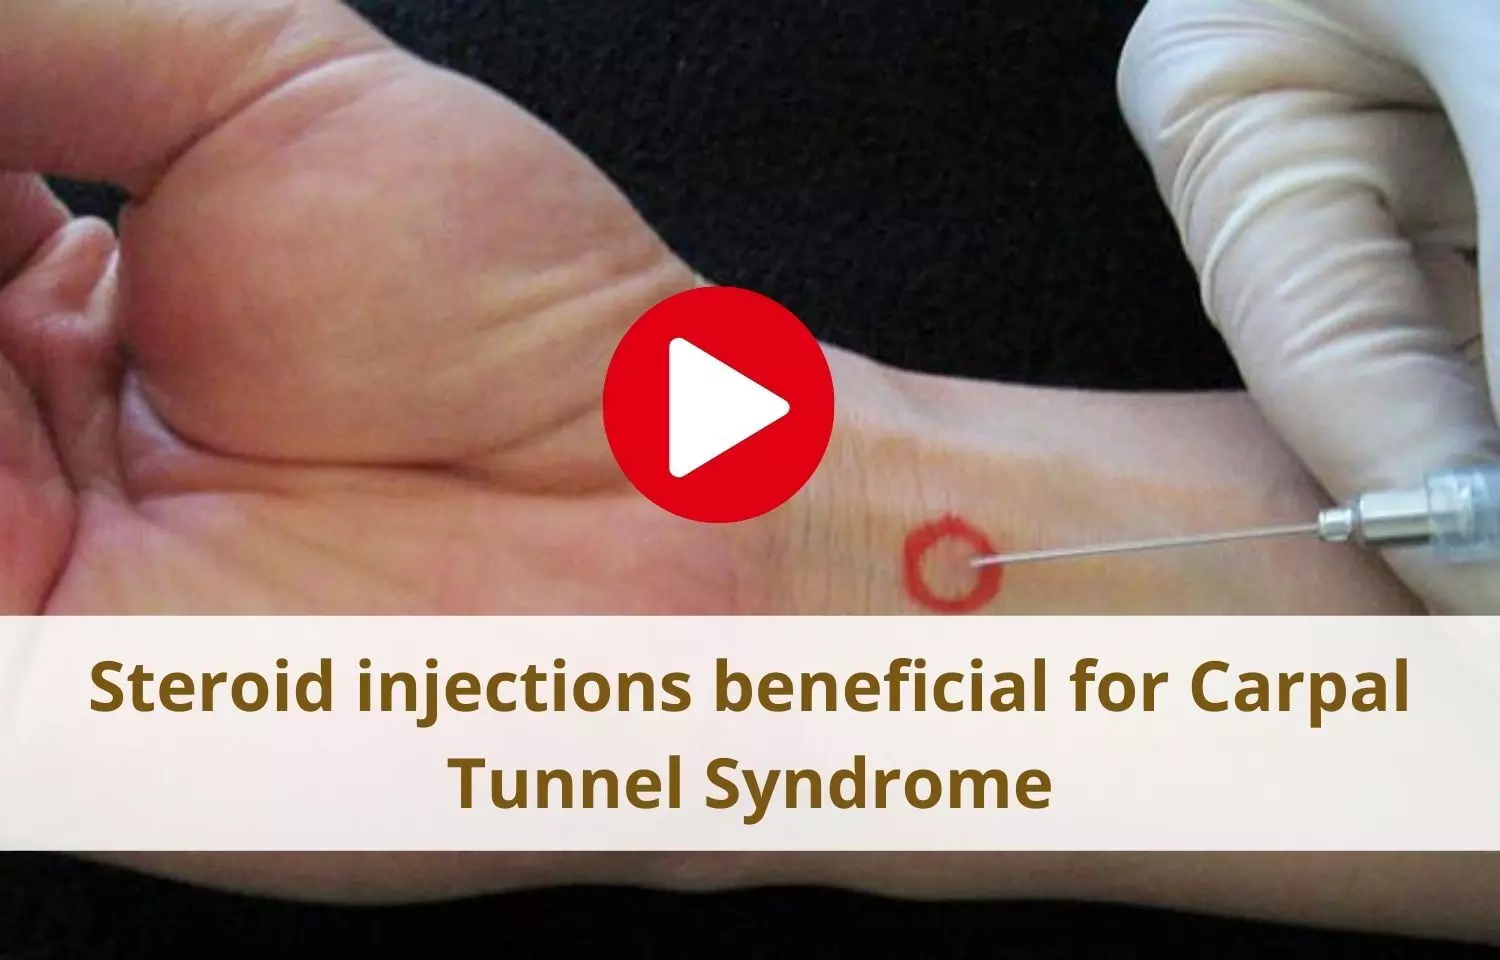 Steroid injections beneficial for Carpal Tunnel Syndrome